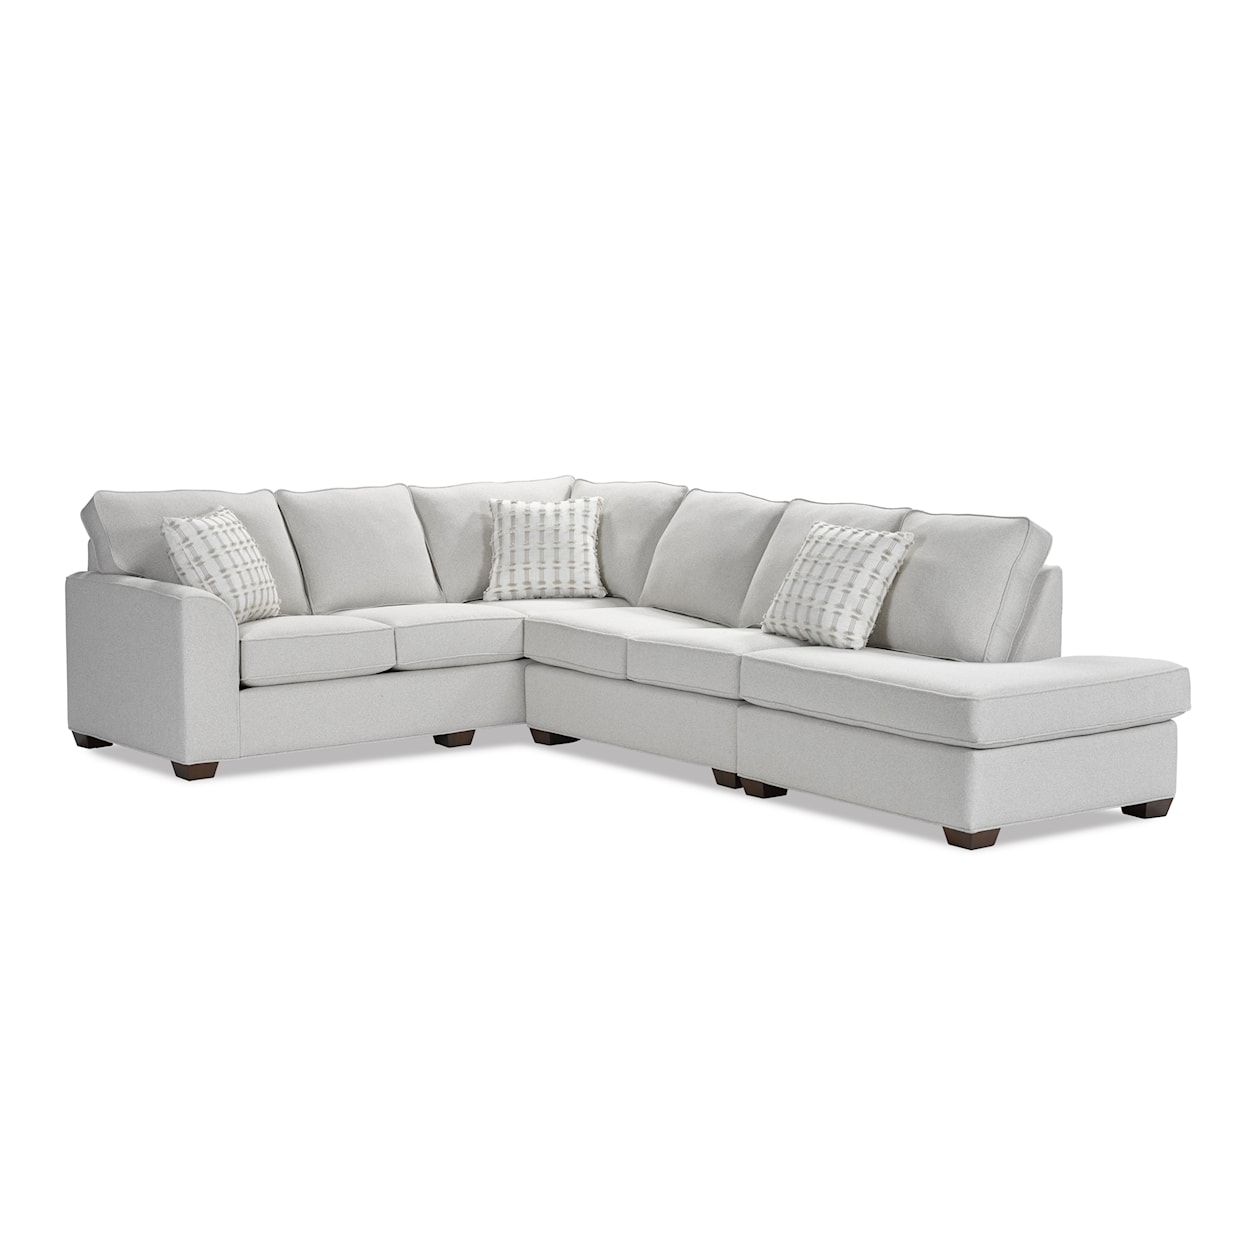 Lancer 3020 Sectional Group 3-Piece Sectional Sofa